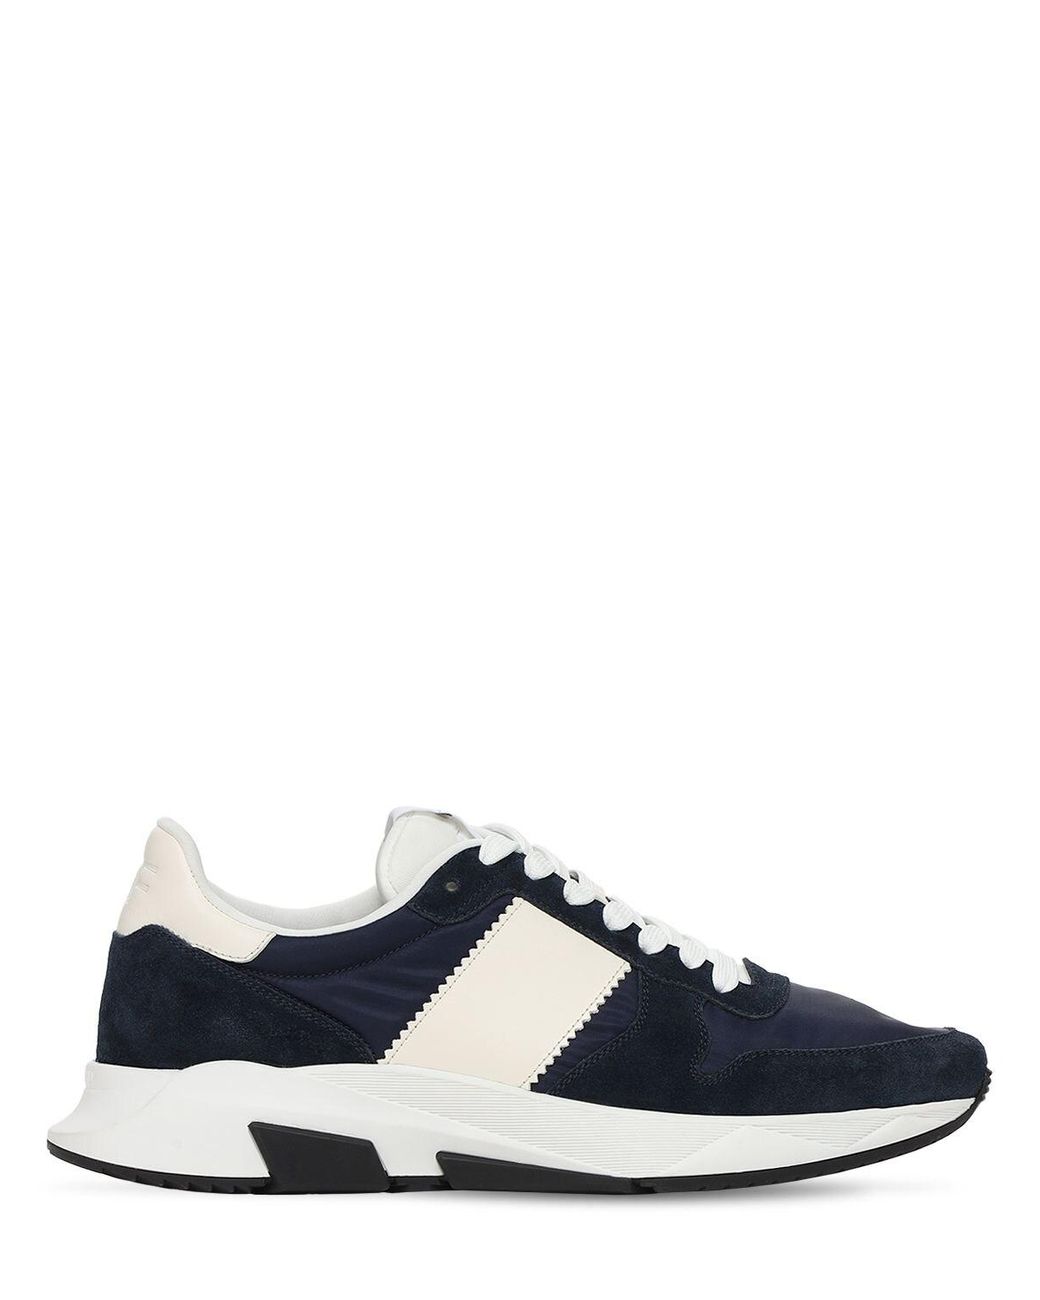 Tom Ford Jagga Suede & Nylon Low Top Sneakers in Indigo (Blue) for Men ...